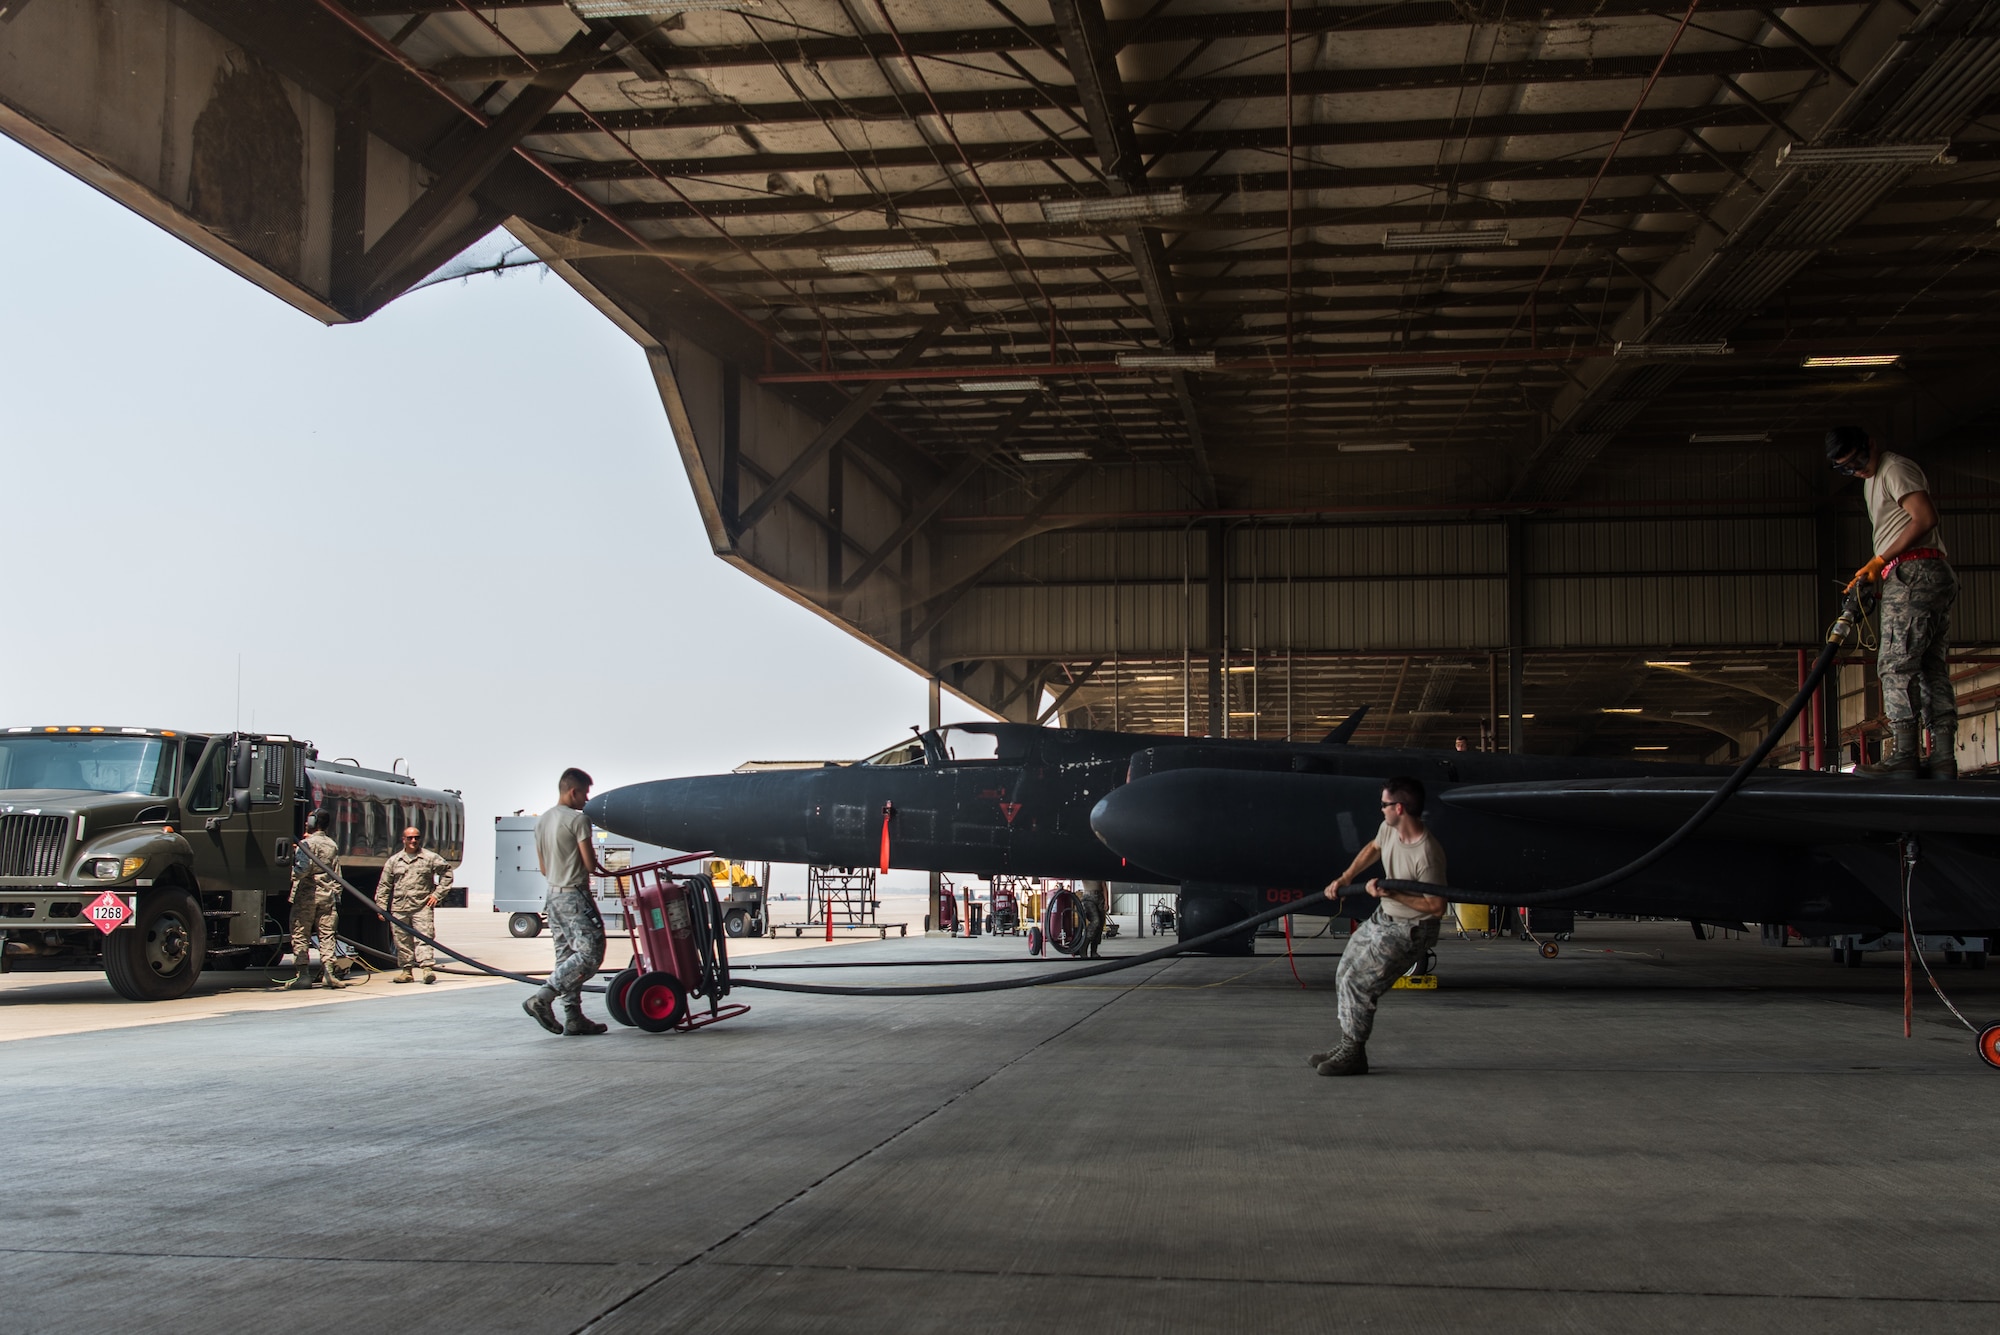 Airmen with the 9th Logistics Readiness Squadron and the 9th Aircraft Maintenance Squadron refuel a U-2 Dragon Lady at Beale Air Force Base, California, Aug. 9, 2018. Beale Airmen are responsible for maintaining and operating reconnaissance platforms such as the RQ-4 Global Hawk and U-2. (U.S. Air Force photo by Senior Airman Justin Parsons)